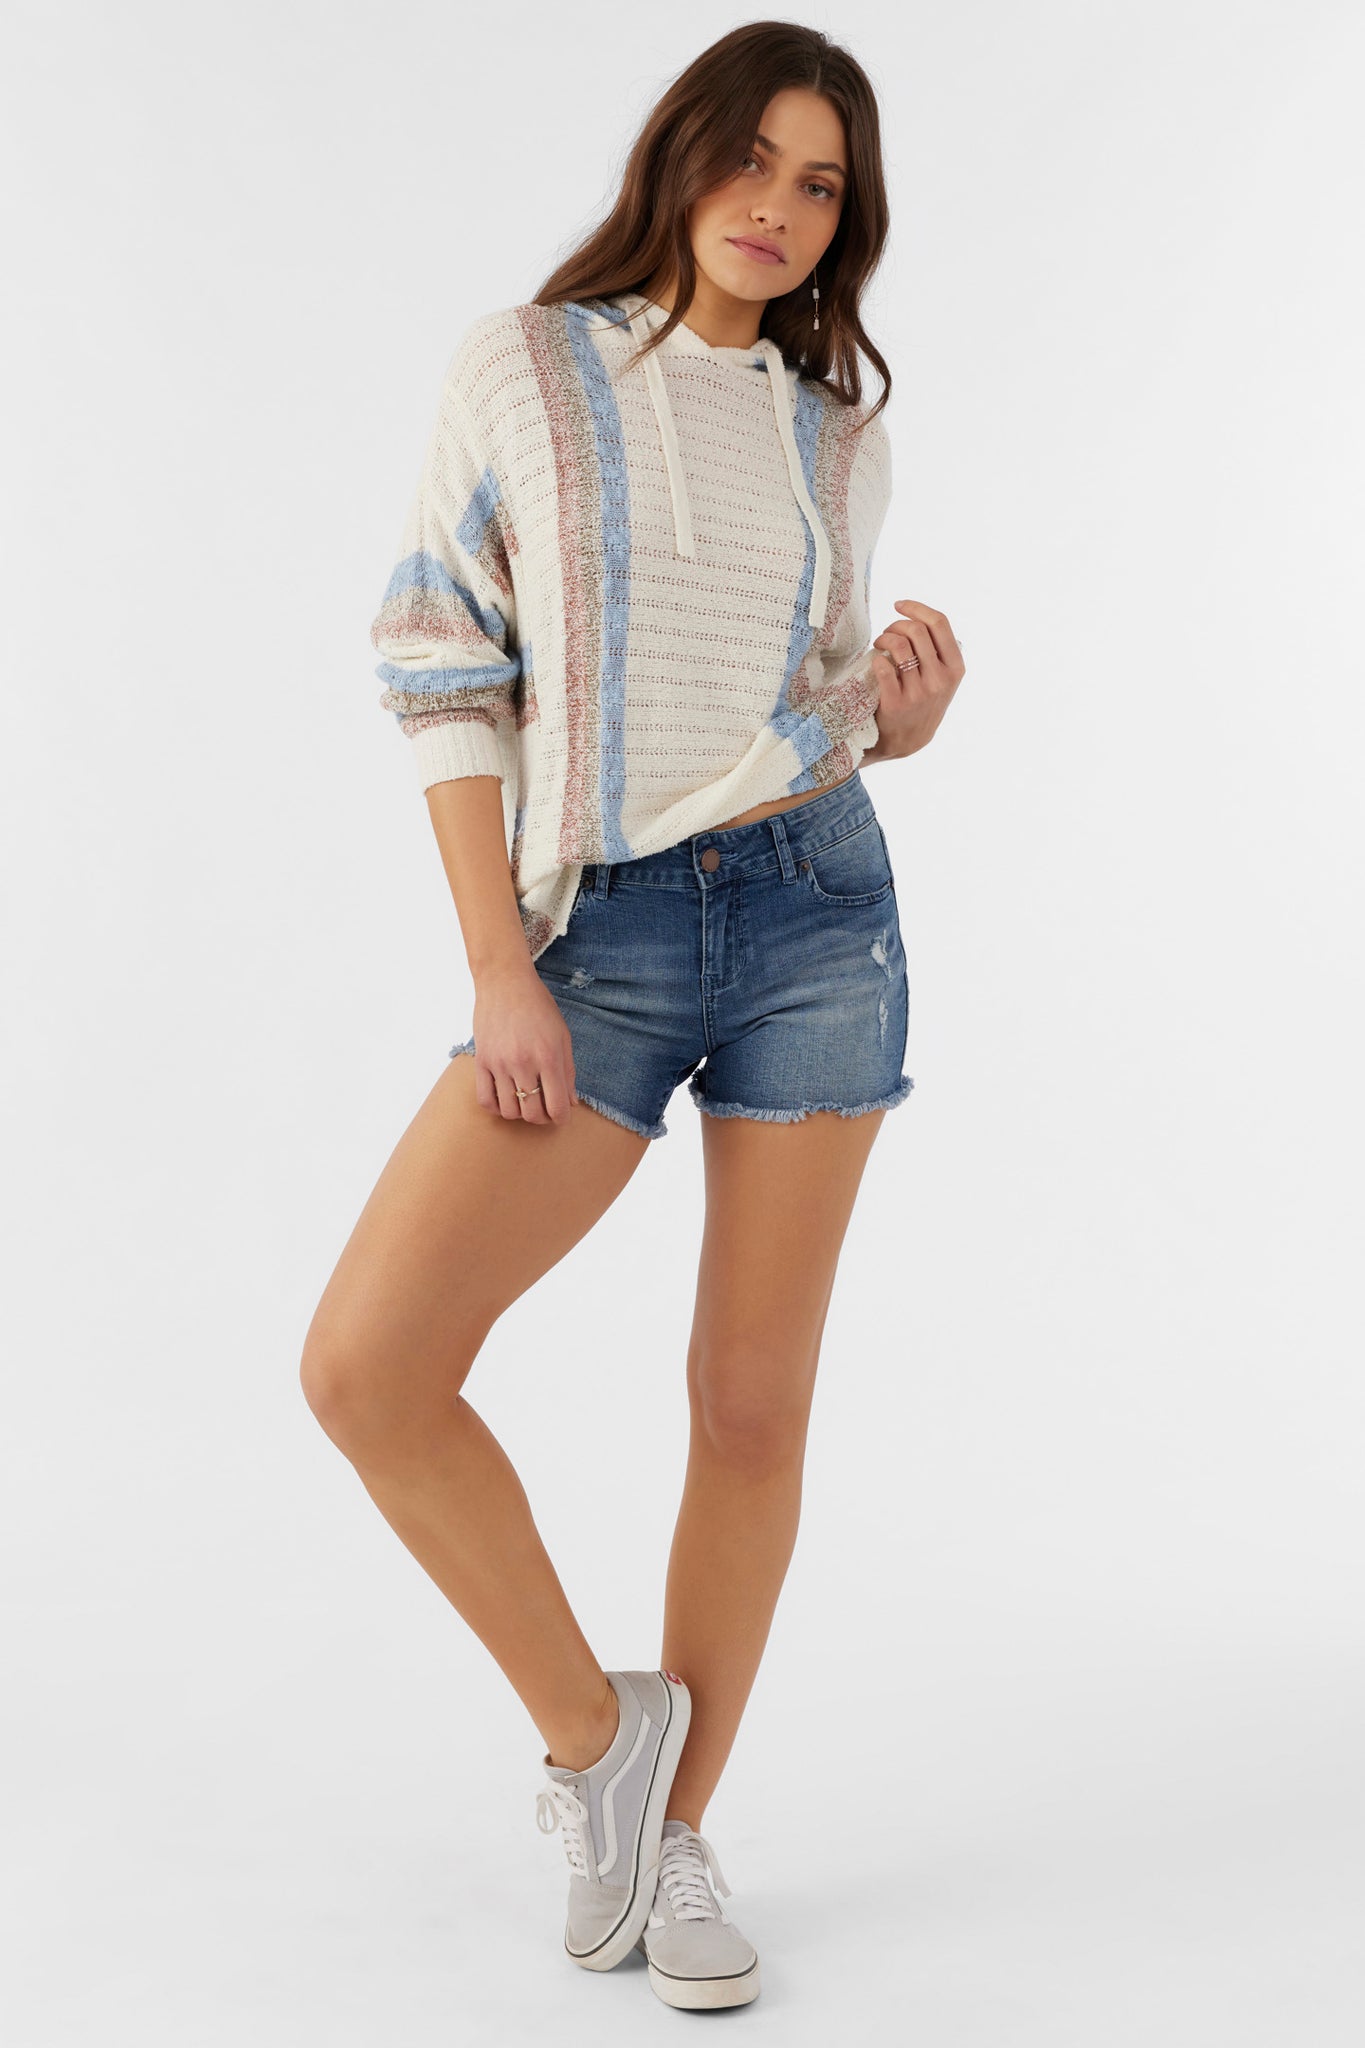 BETHANY PULLOVER SWEATER